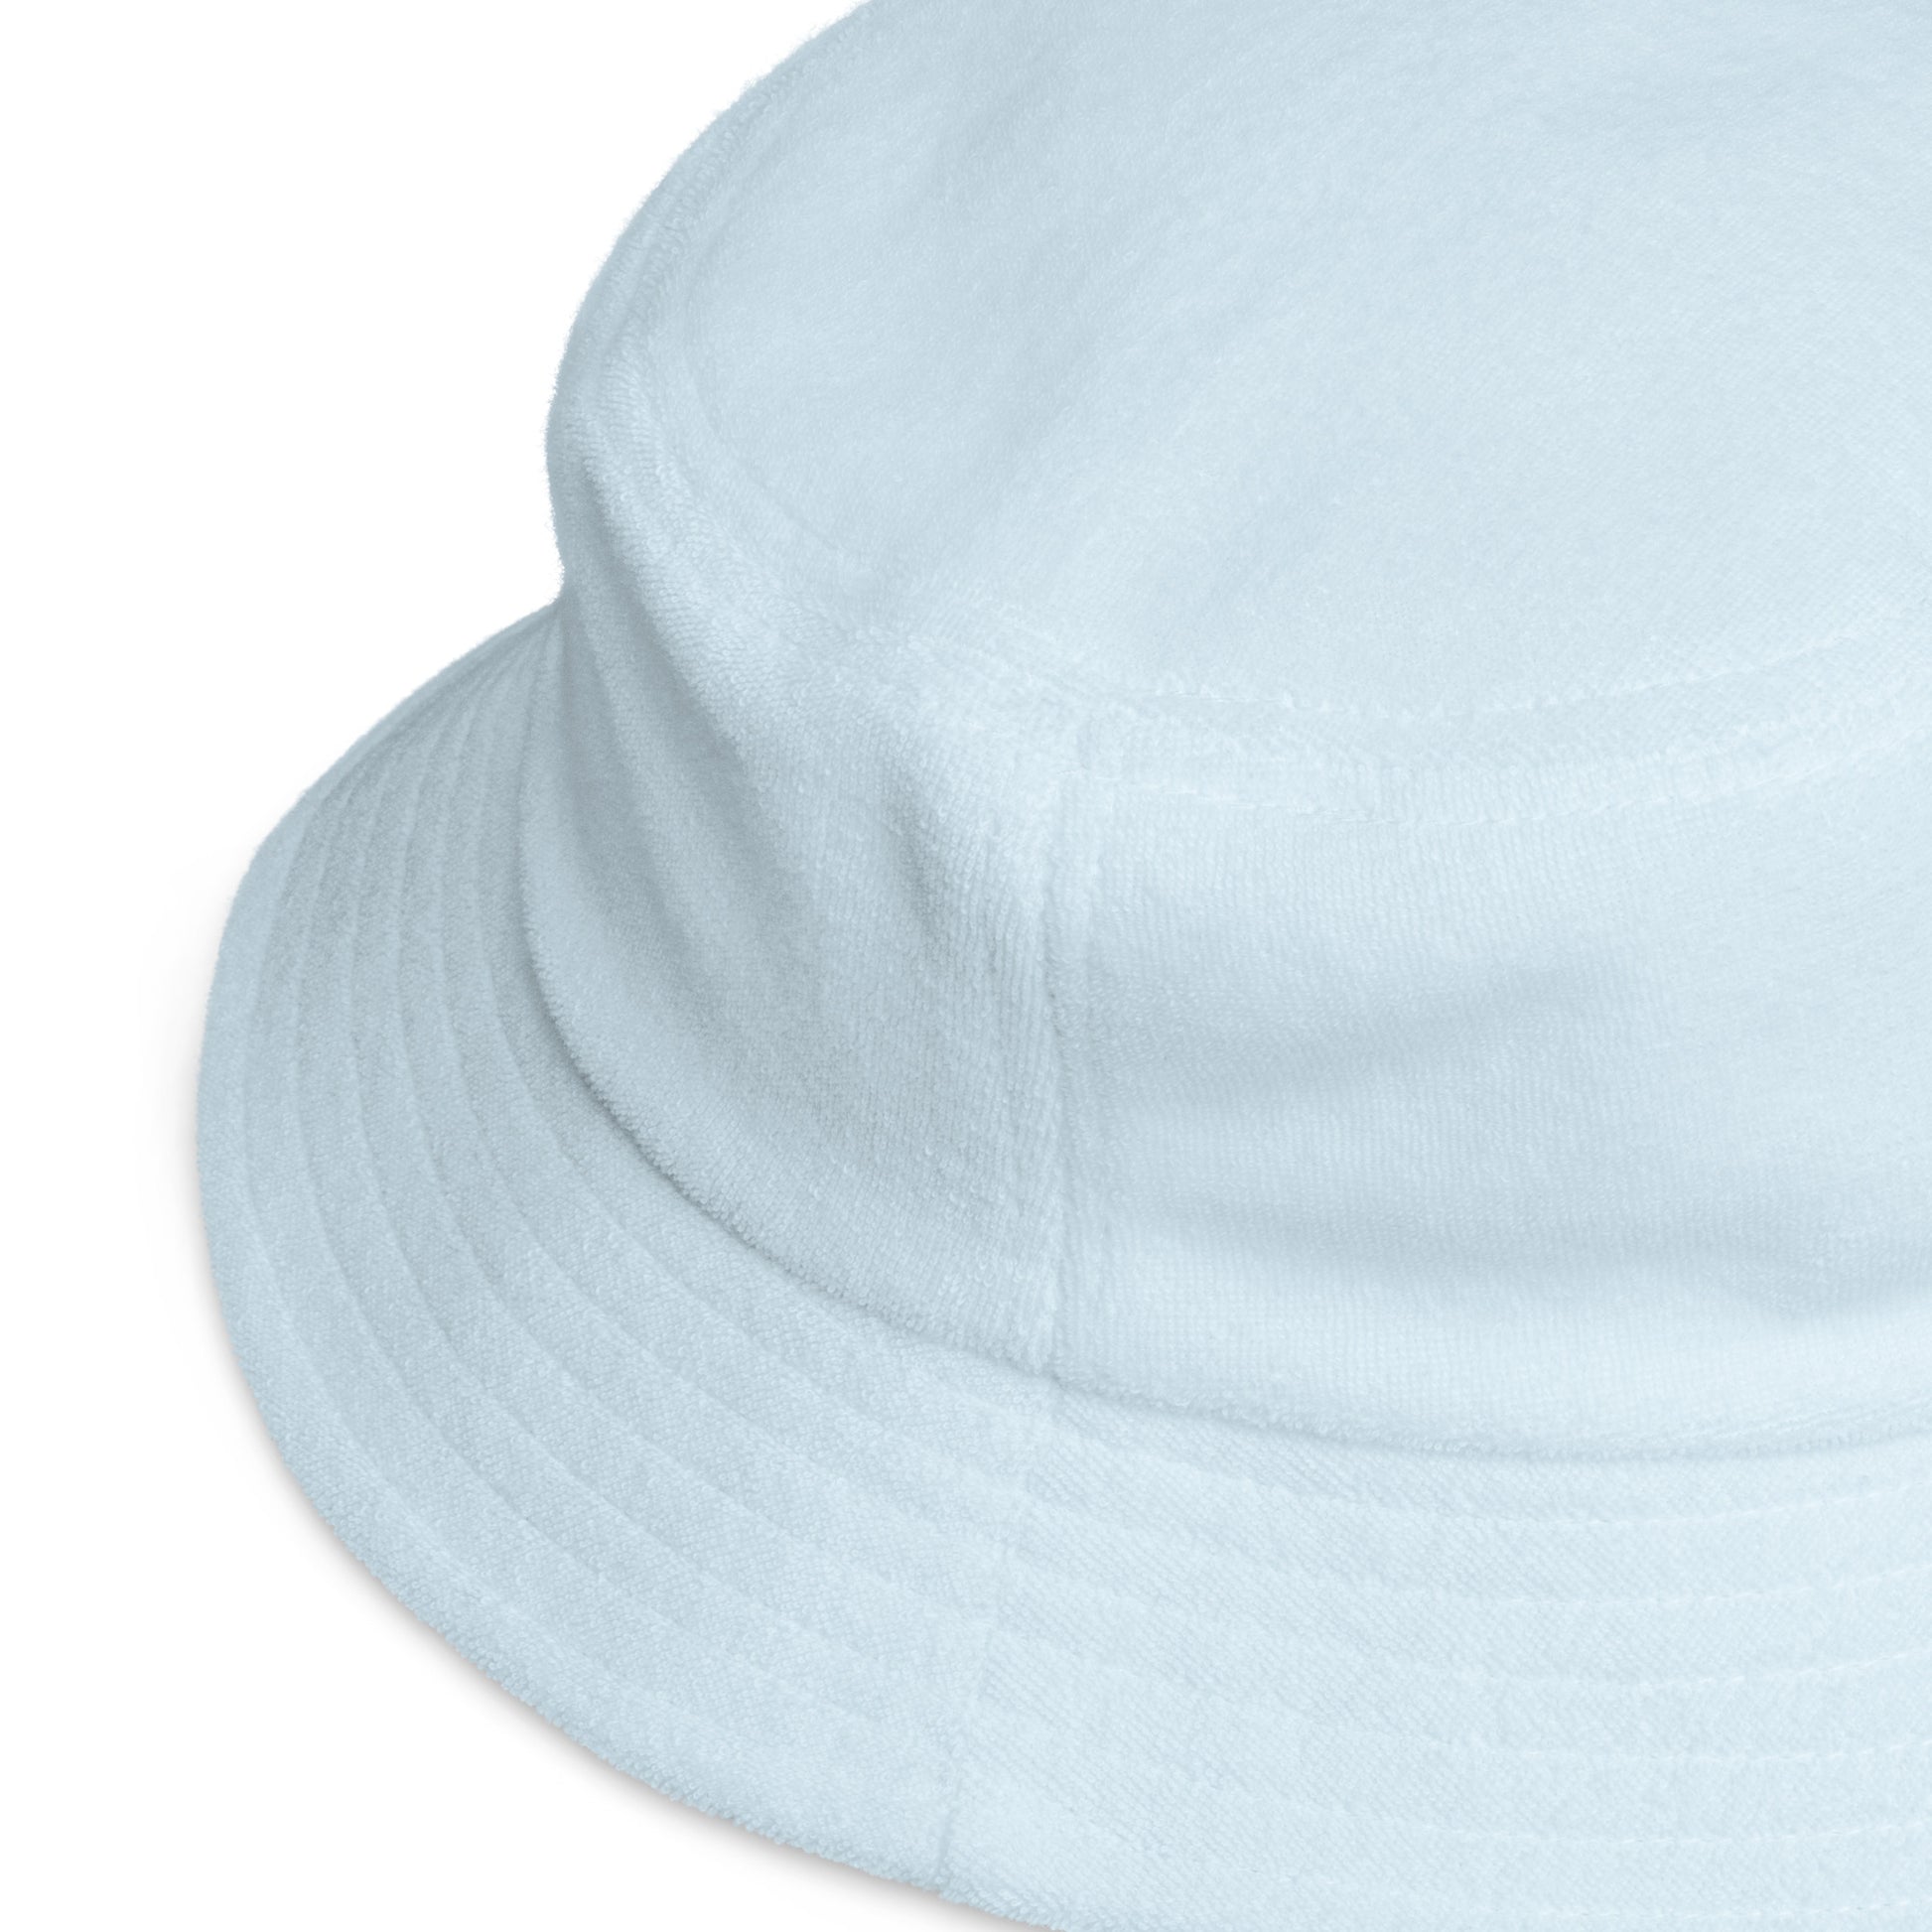 Hola Fuzzy Bucket Hat in light blue by Hi 👋 Happy interactions 